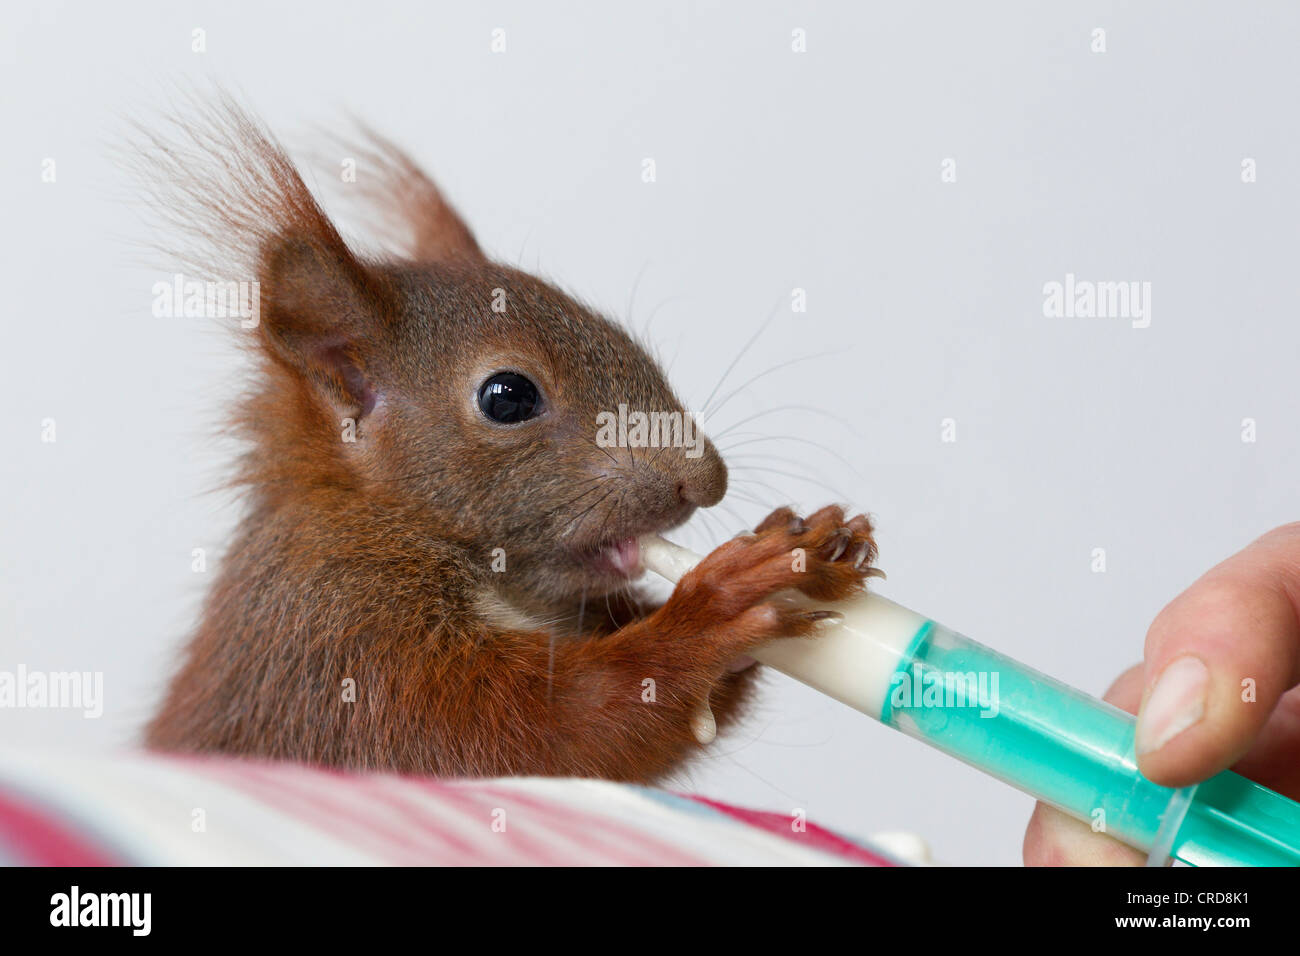 Hand reared squirrel Stock Photo